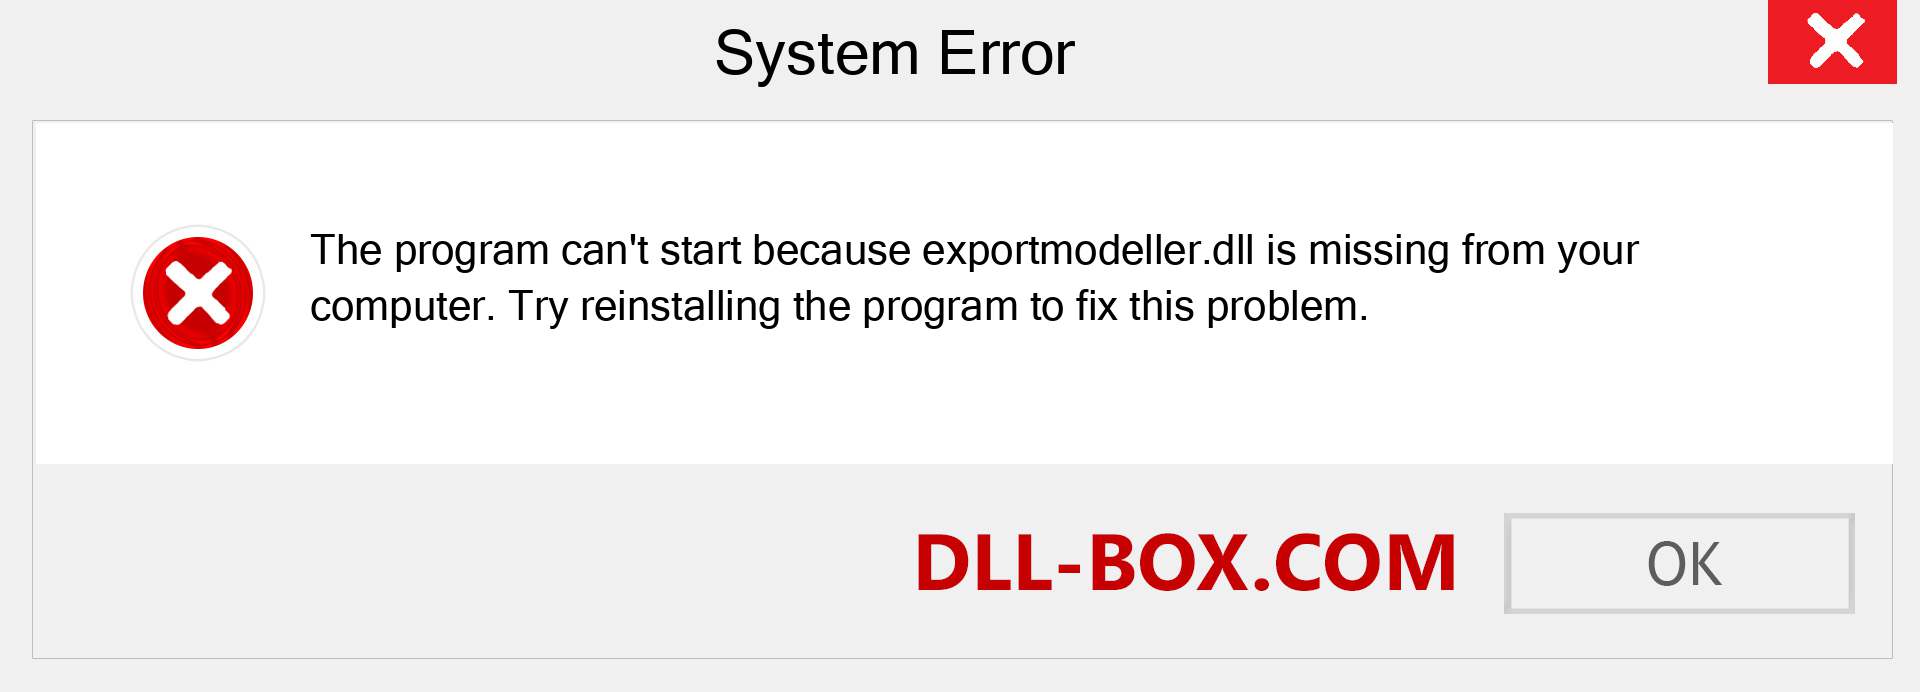  exportmodeller.dll file is missing?. Download for Windows 7, 8, 10 - Fix  exportmodeller dll Missing Error on Windows, photos, images